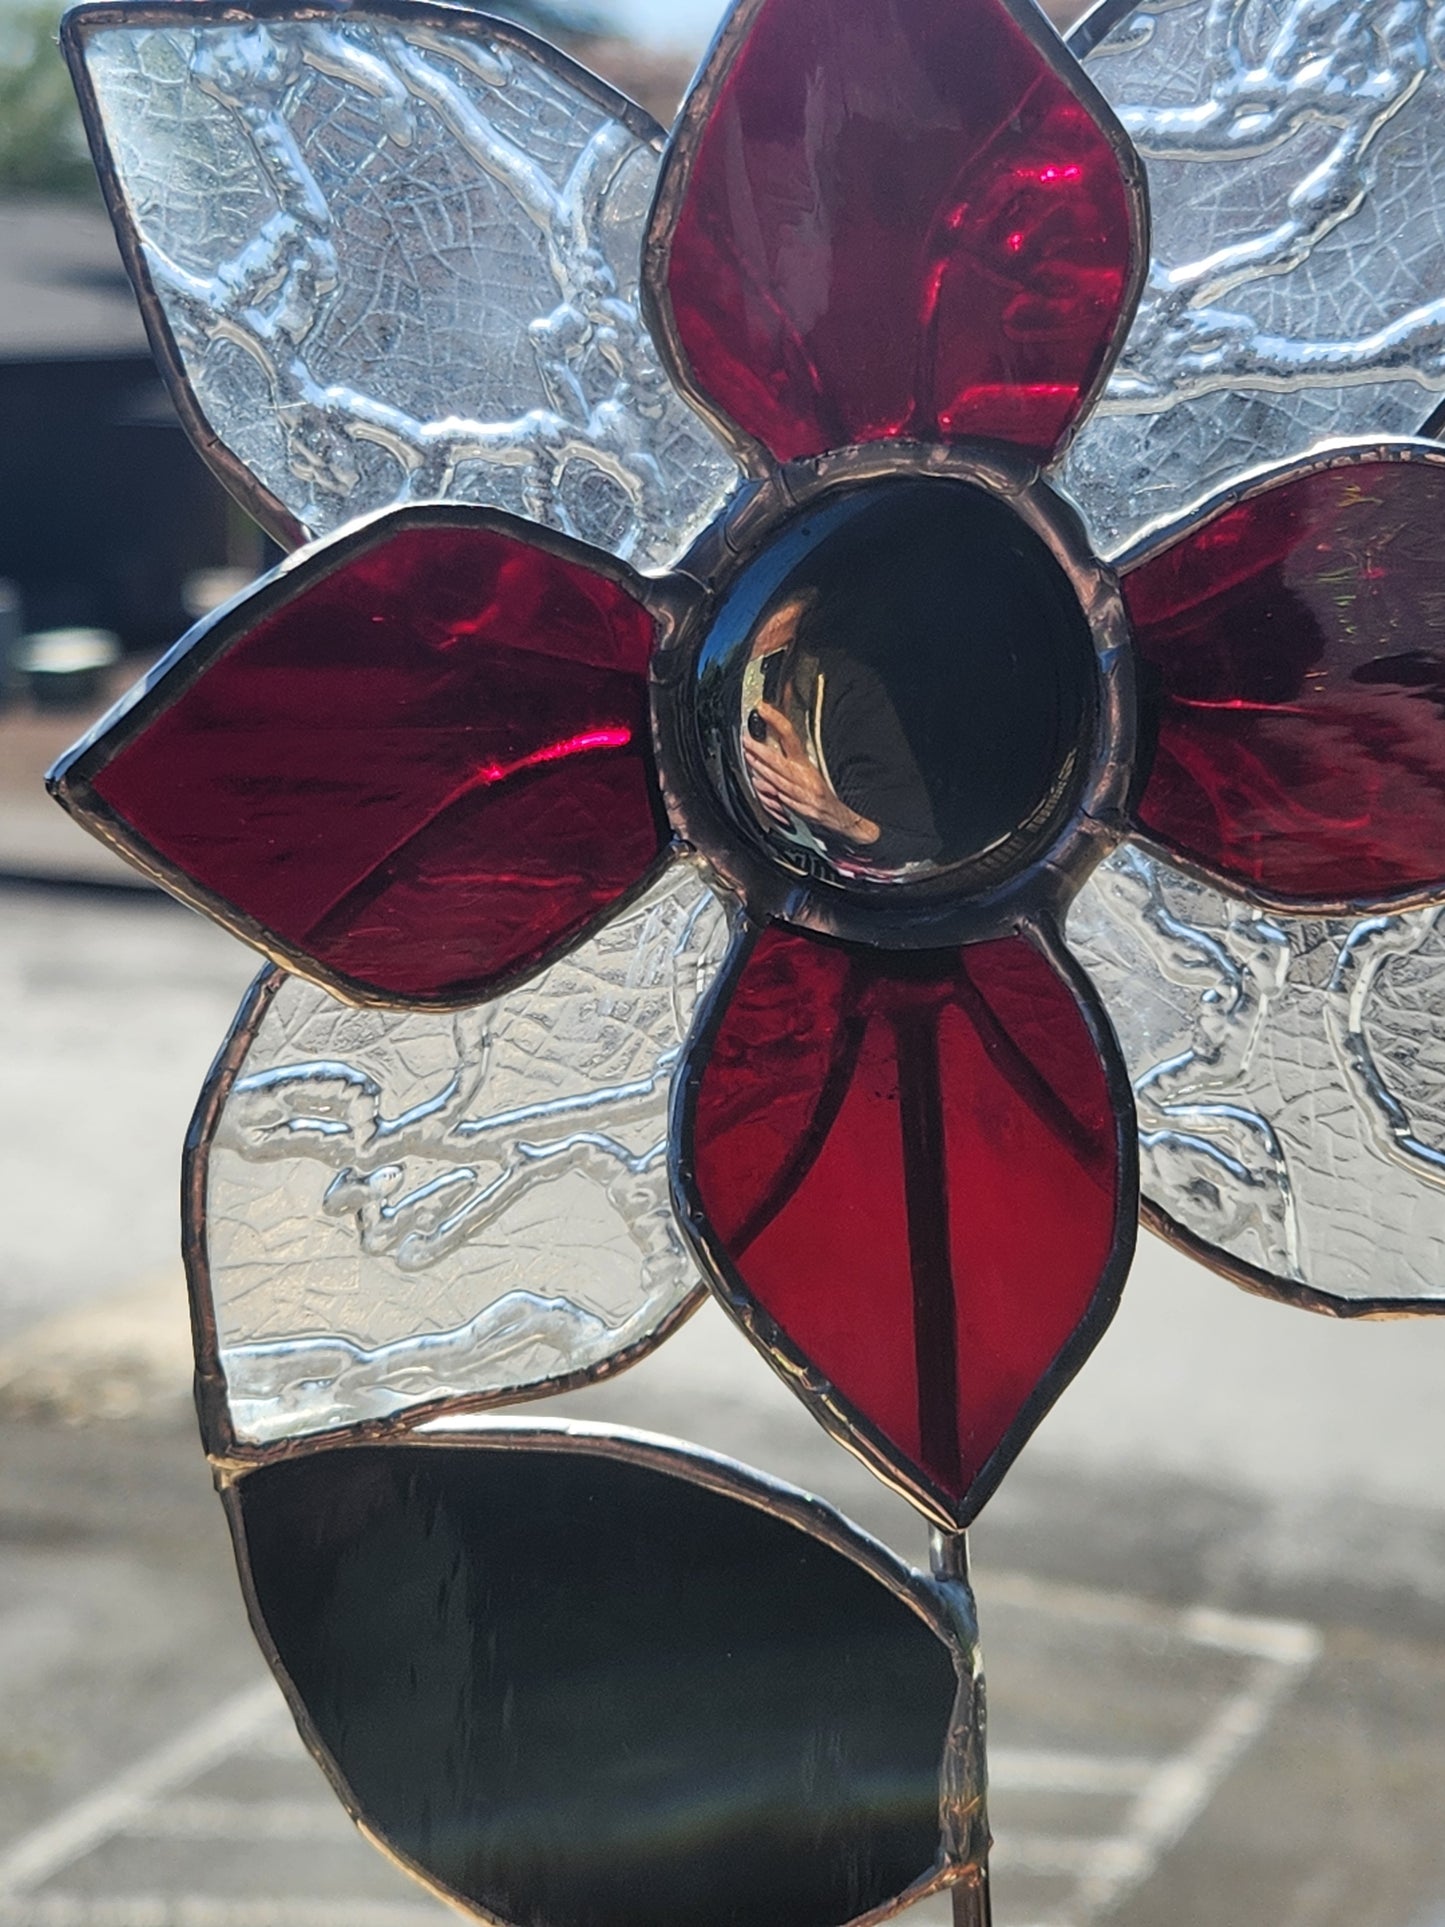 Crinkle Clear Textured & Red Stained Glass Potted Flower with Gunmetal Glass Nugget Center